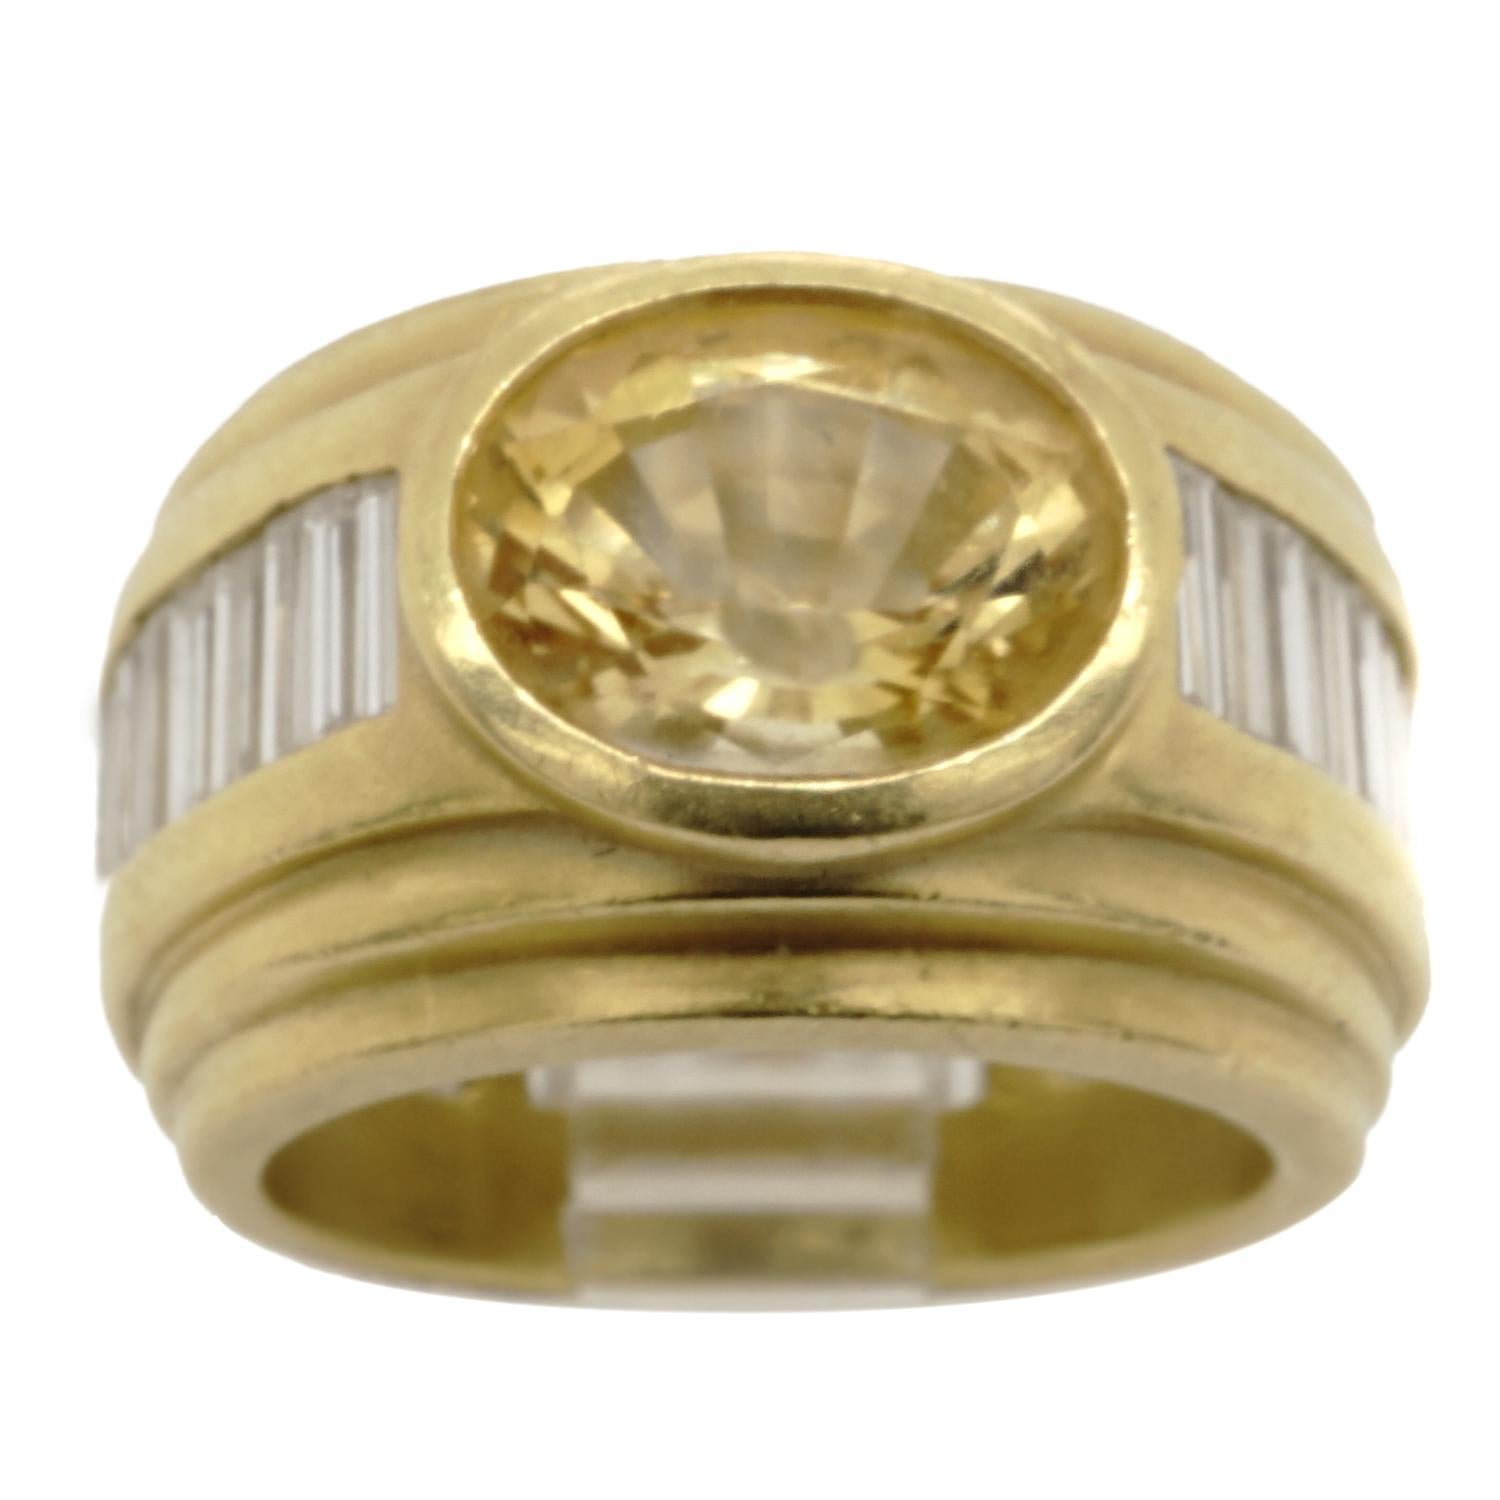 B. Kieselstein Cord Diamond Lemon Citrine, 9.70x7.80x5.70 mm  crafted in 18 karat yellow gold. Signed B. Kieselstein Cord 2000 stamped 750 with trademark.  Ring size 5 1/2.  Top of the ring measures in with 12.5mm, the back of the ring measures 10mm